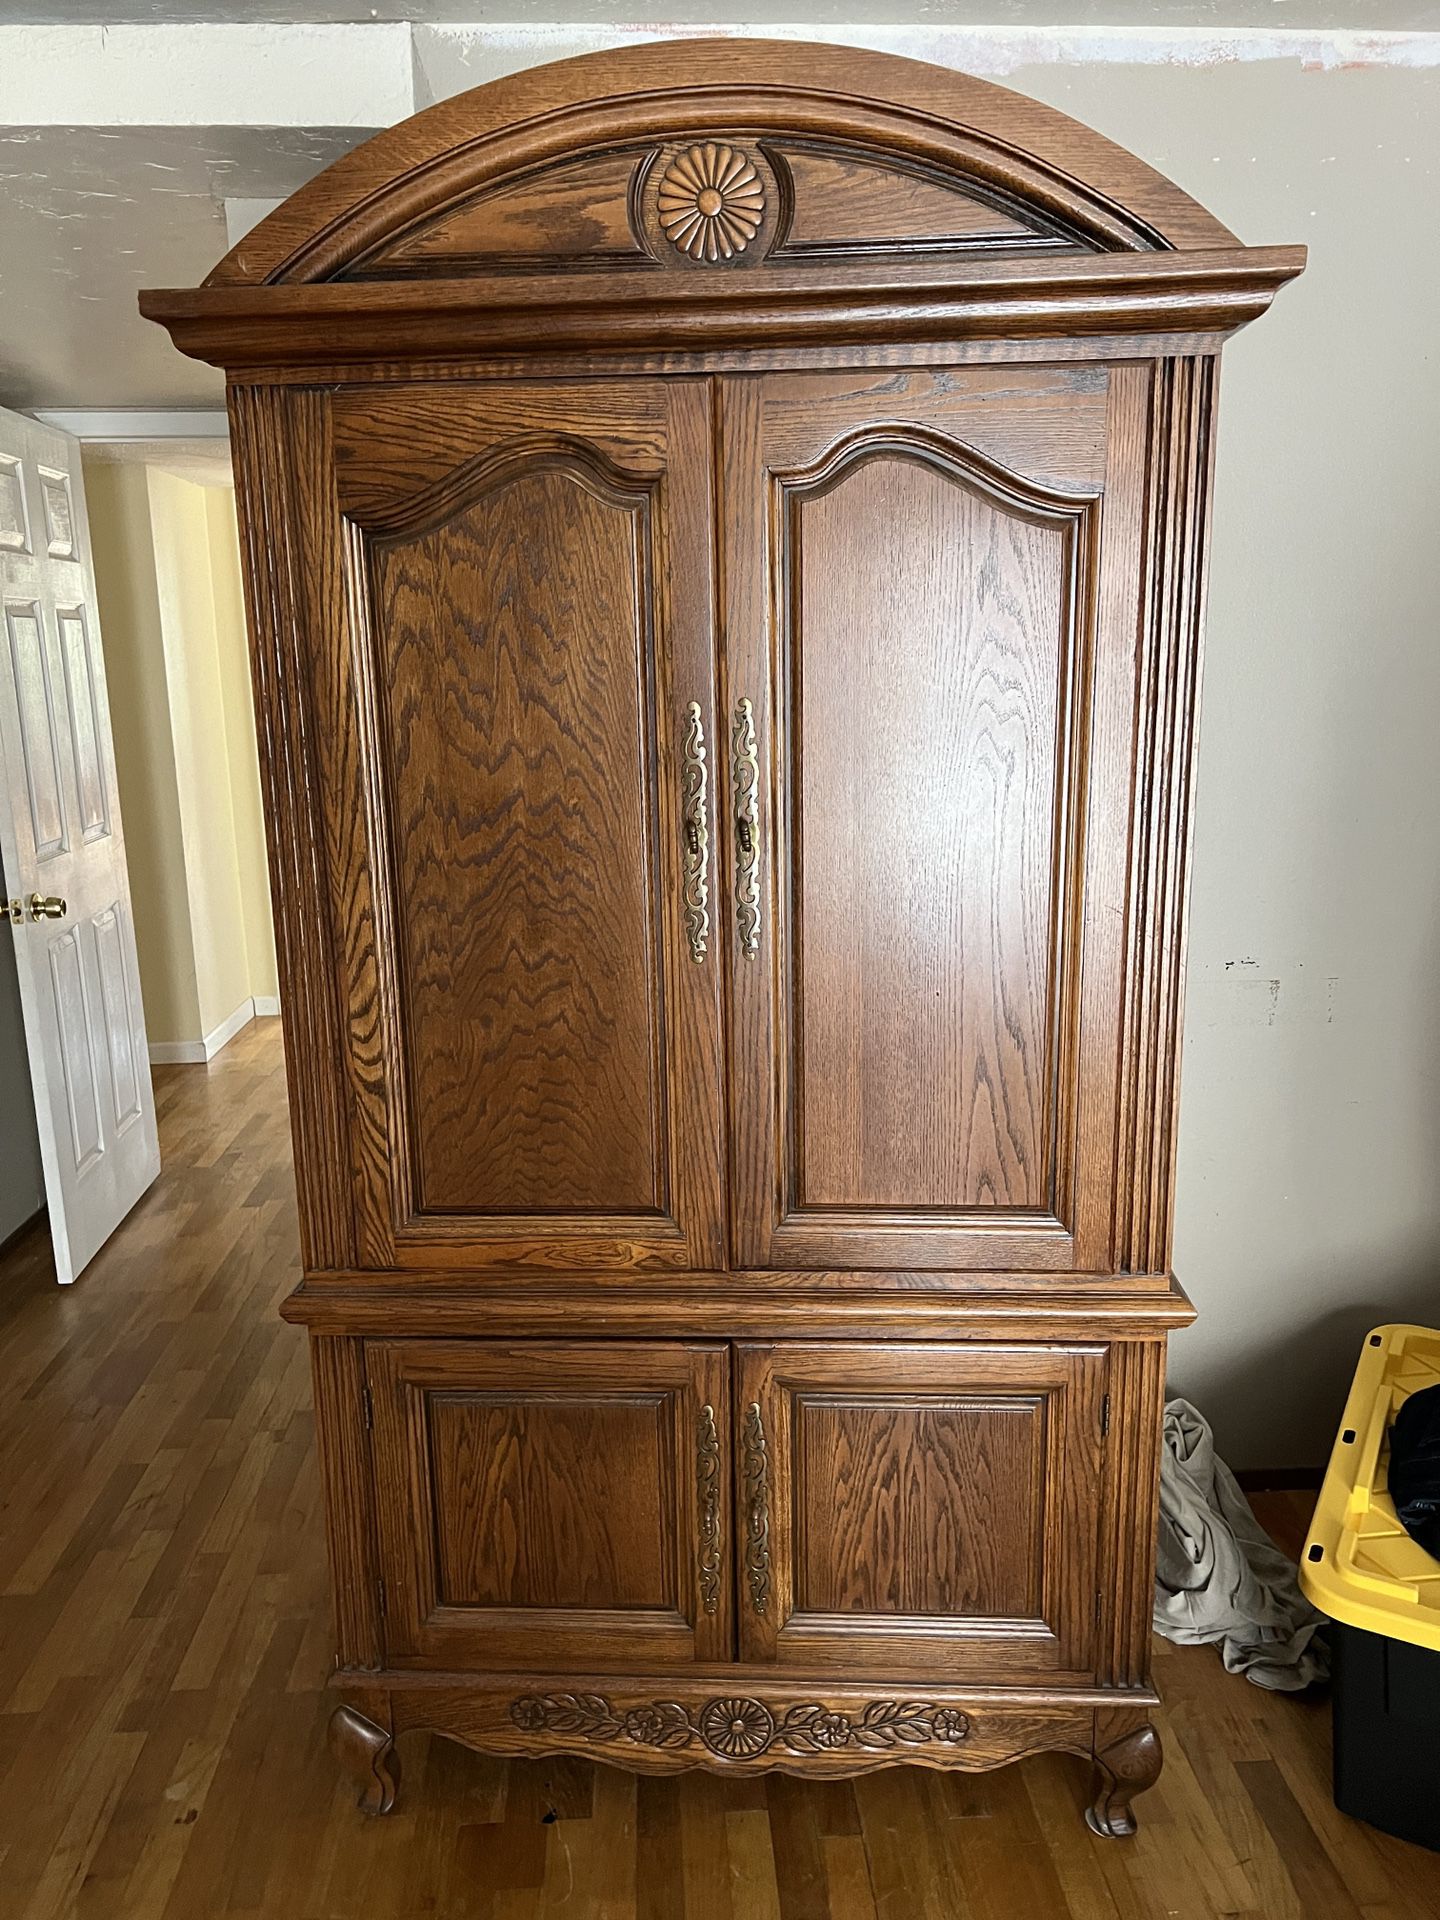 FREE Large Armoire 